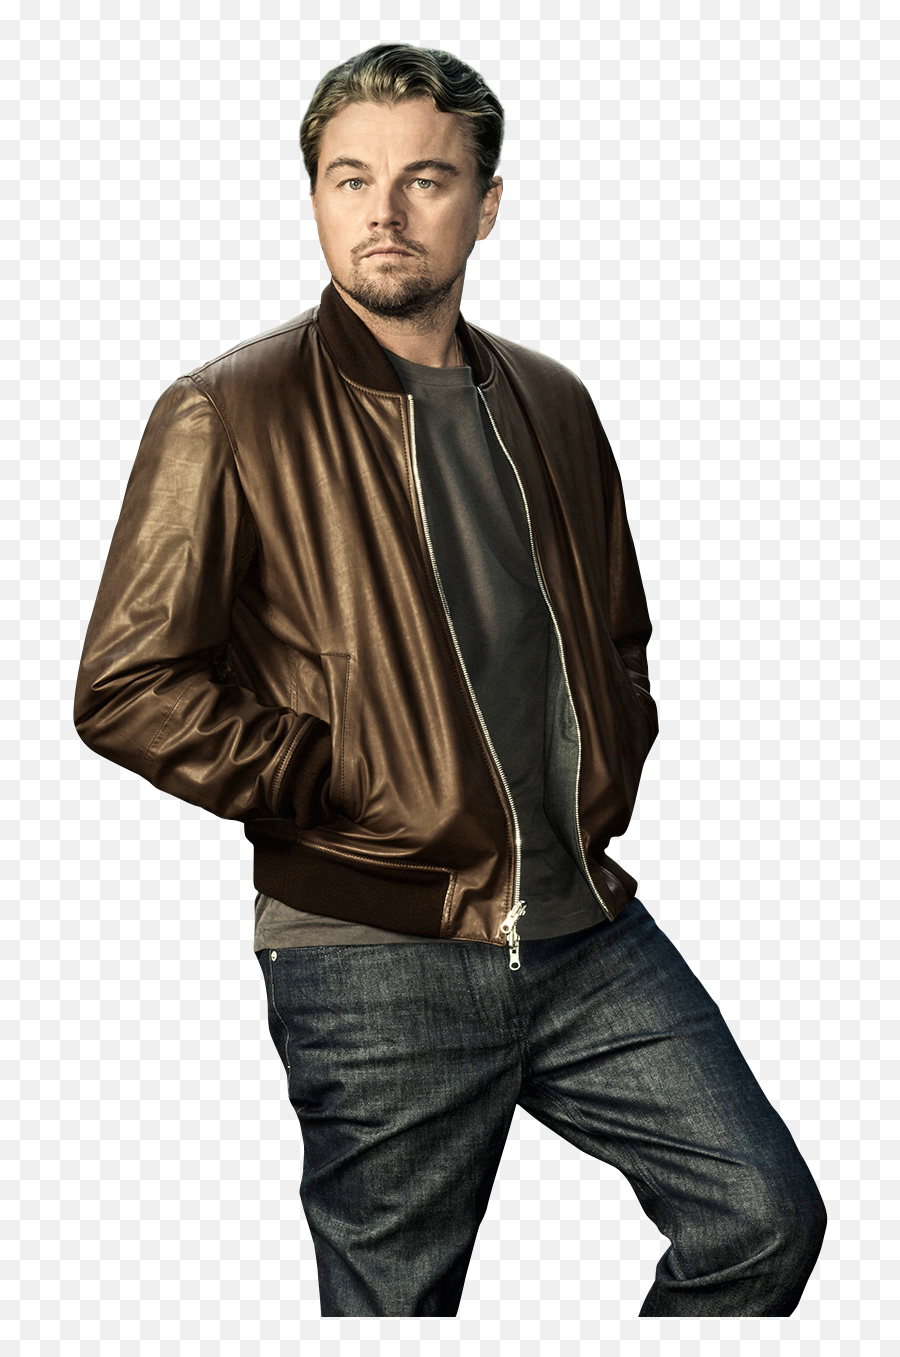 Transparent Png Images Icons And Clip Arts - Leonardo Dicaprio Png,Actor Png